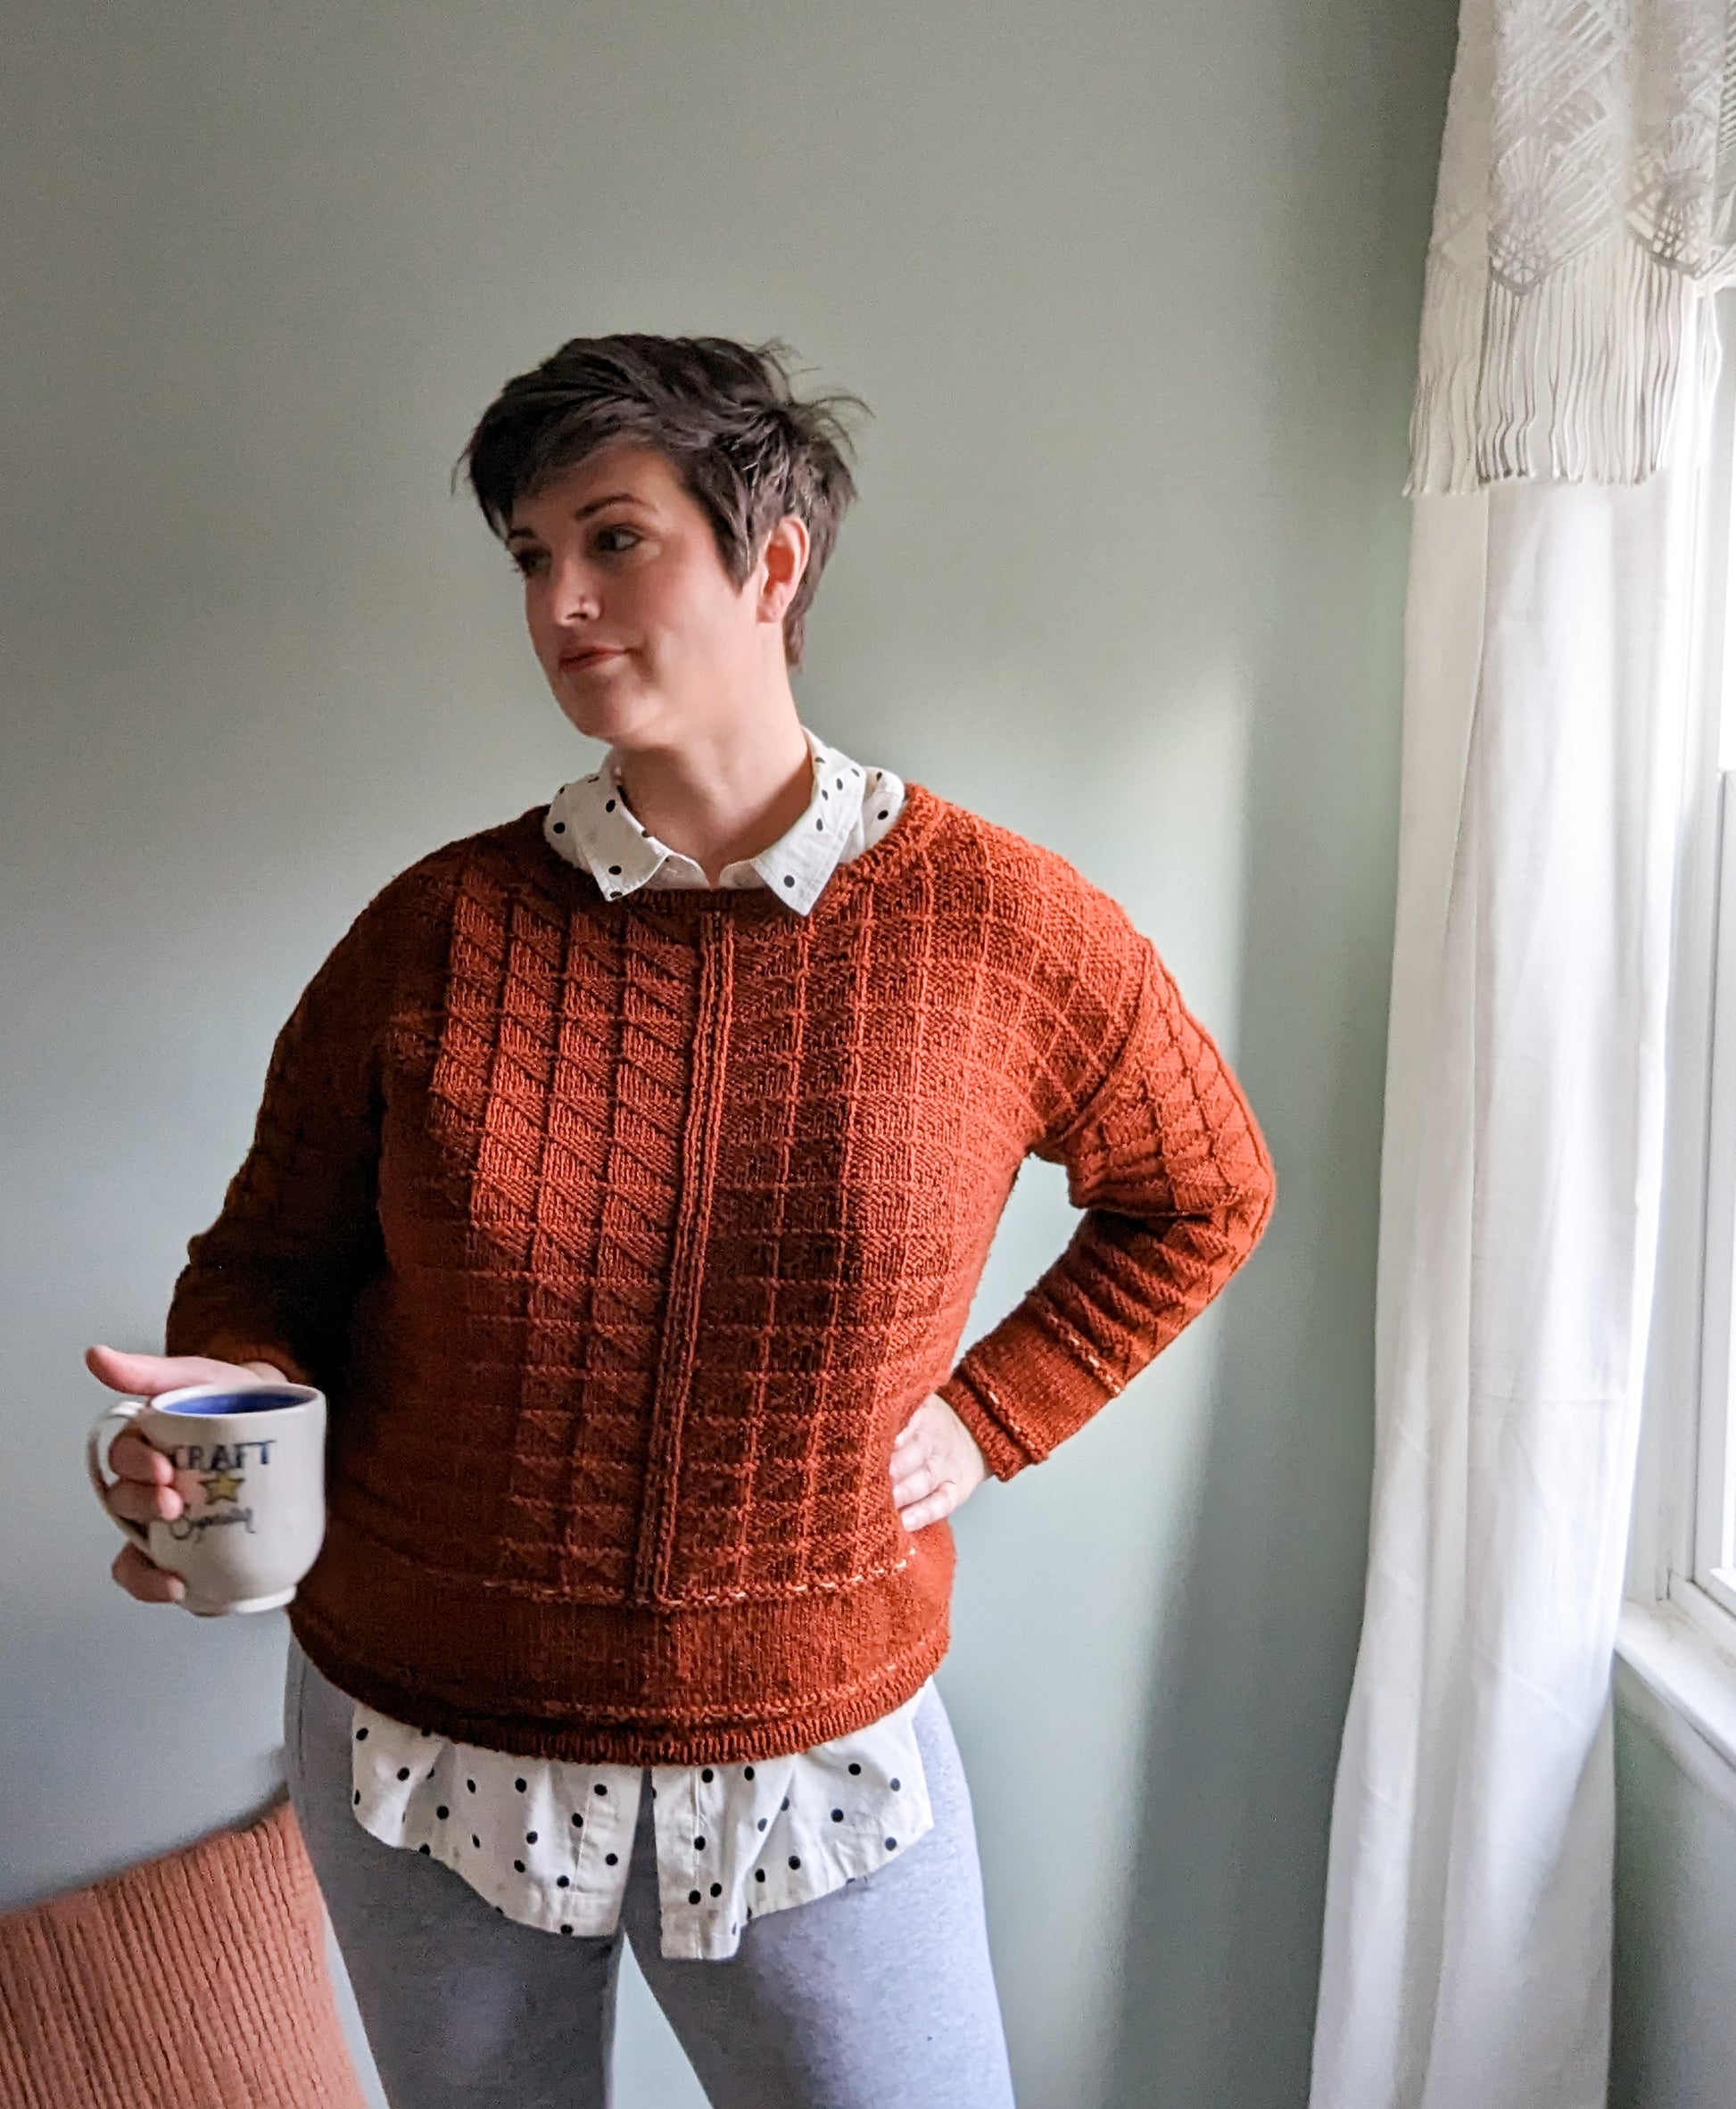 Jen holds a mug, looking off camera. She wears a brick red pullover, knit in a quilt stitch, over a polka dot button down.